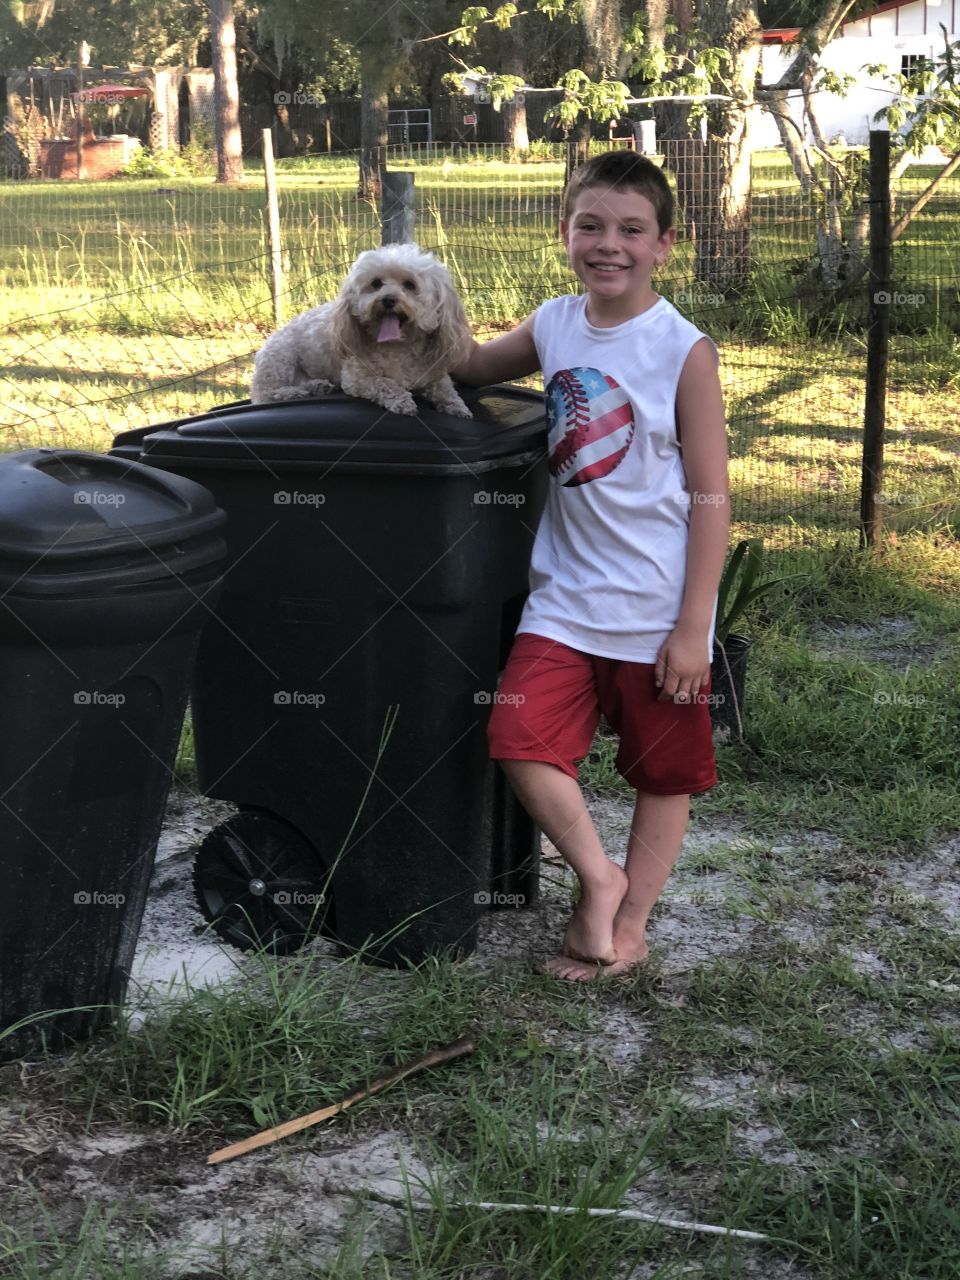 My son happy with his dog sassy what a team they are so cute and sweet adolescence.